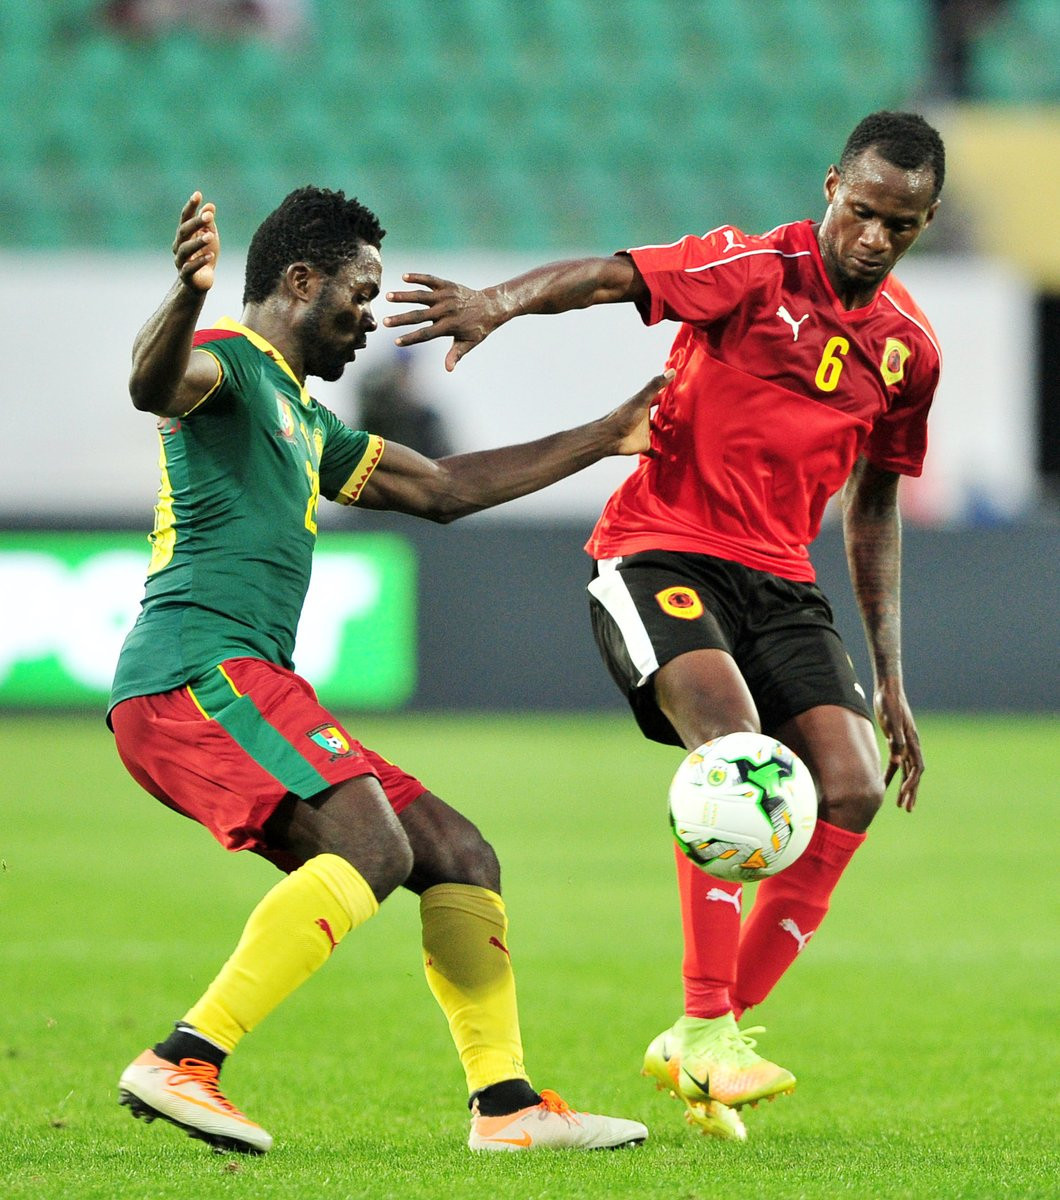 Angola beat Cameroon 1-0 to qualify for the knockout stage of the African Nations Championship in Morocco ©Twitter